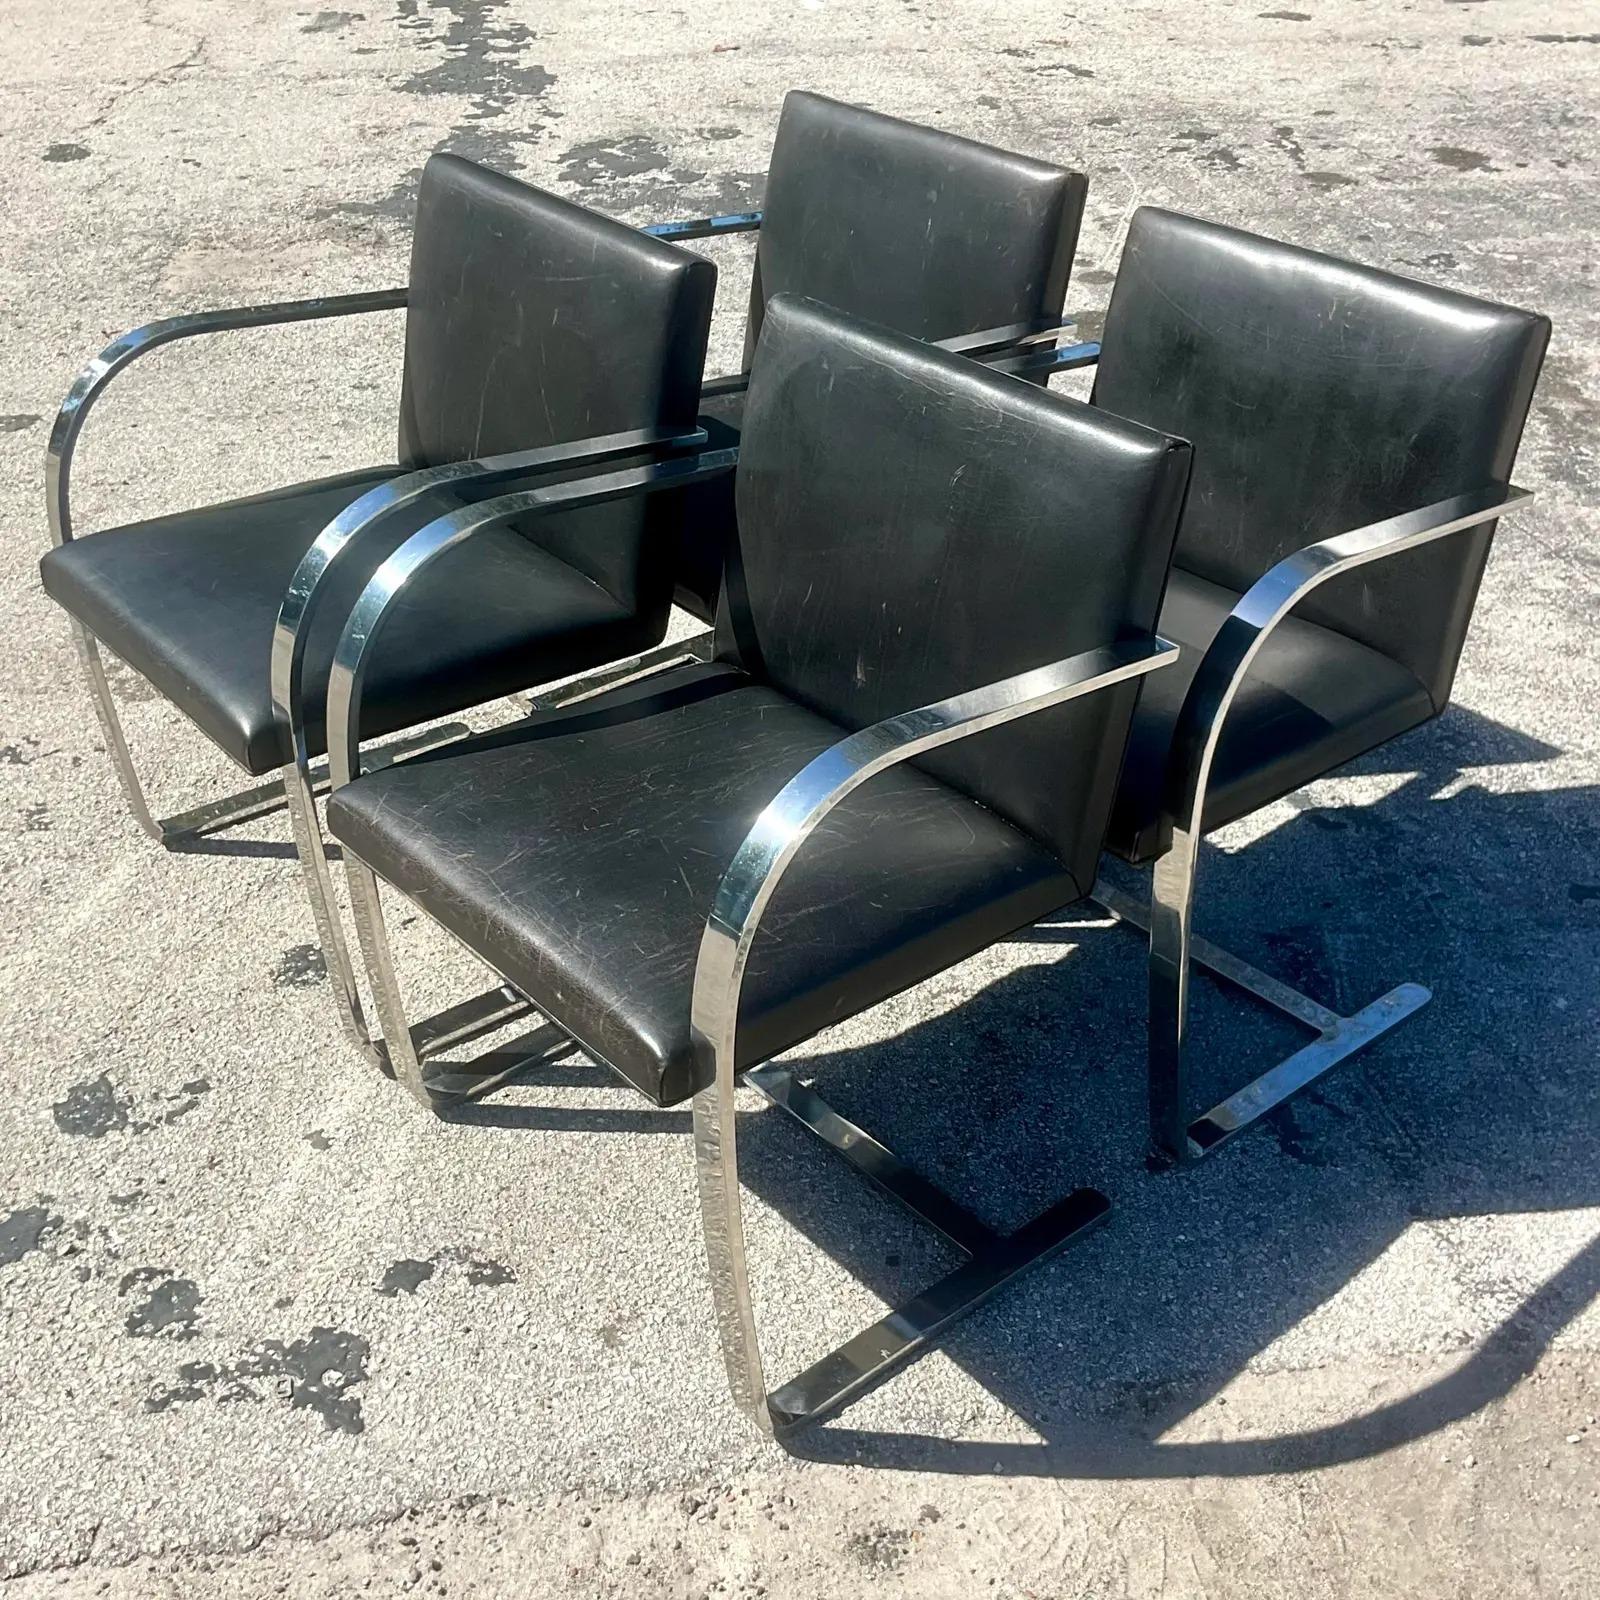 Vintage MCM Miles Van Der Rohe for Knoll Brno Chairs - Set of 4 For Sale 5